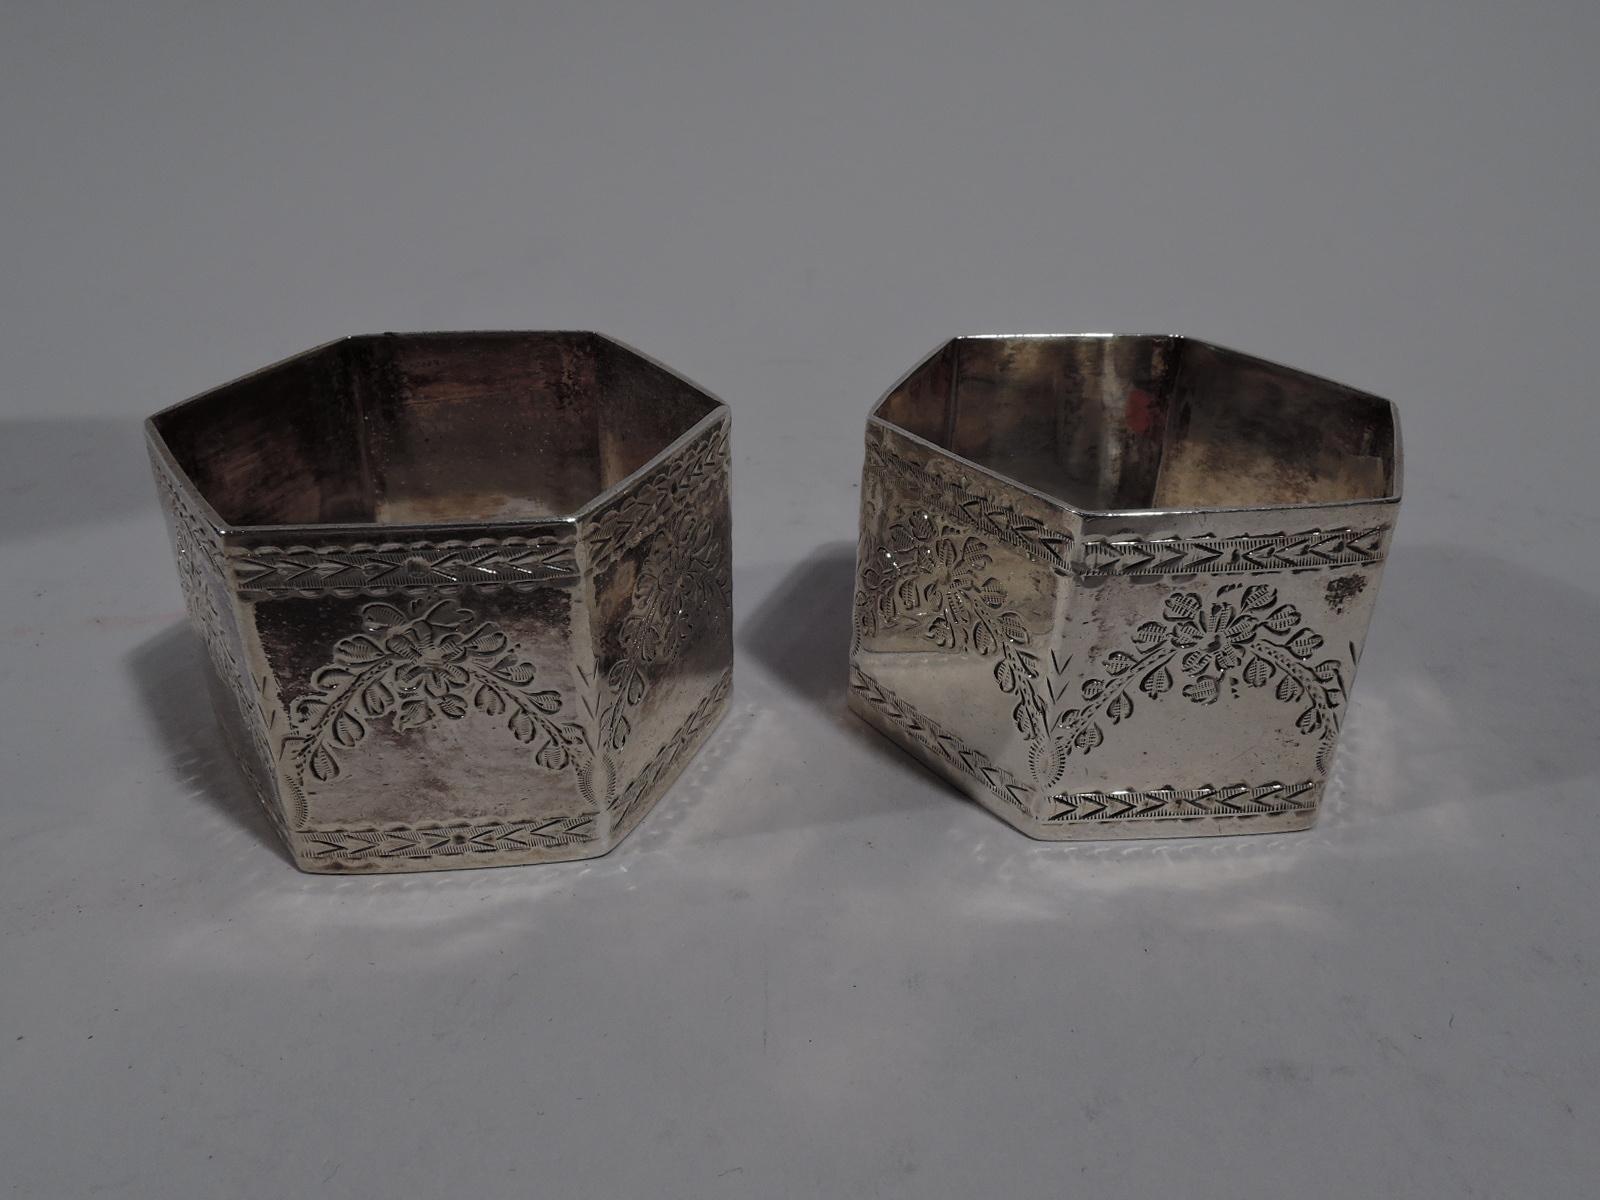 Pair of Victorian sterling silver napkin rings. Made by Martin, Hall in Sheffield in 1888-1890. Each: hexagon engraved with garlands and leafy borders. Traditional ornament applied to modern form. In leather-bound case with silk lining and fitted